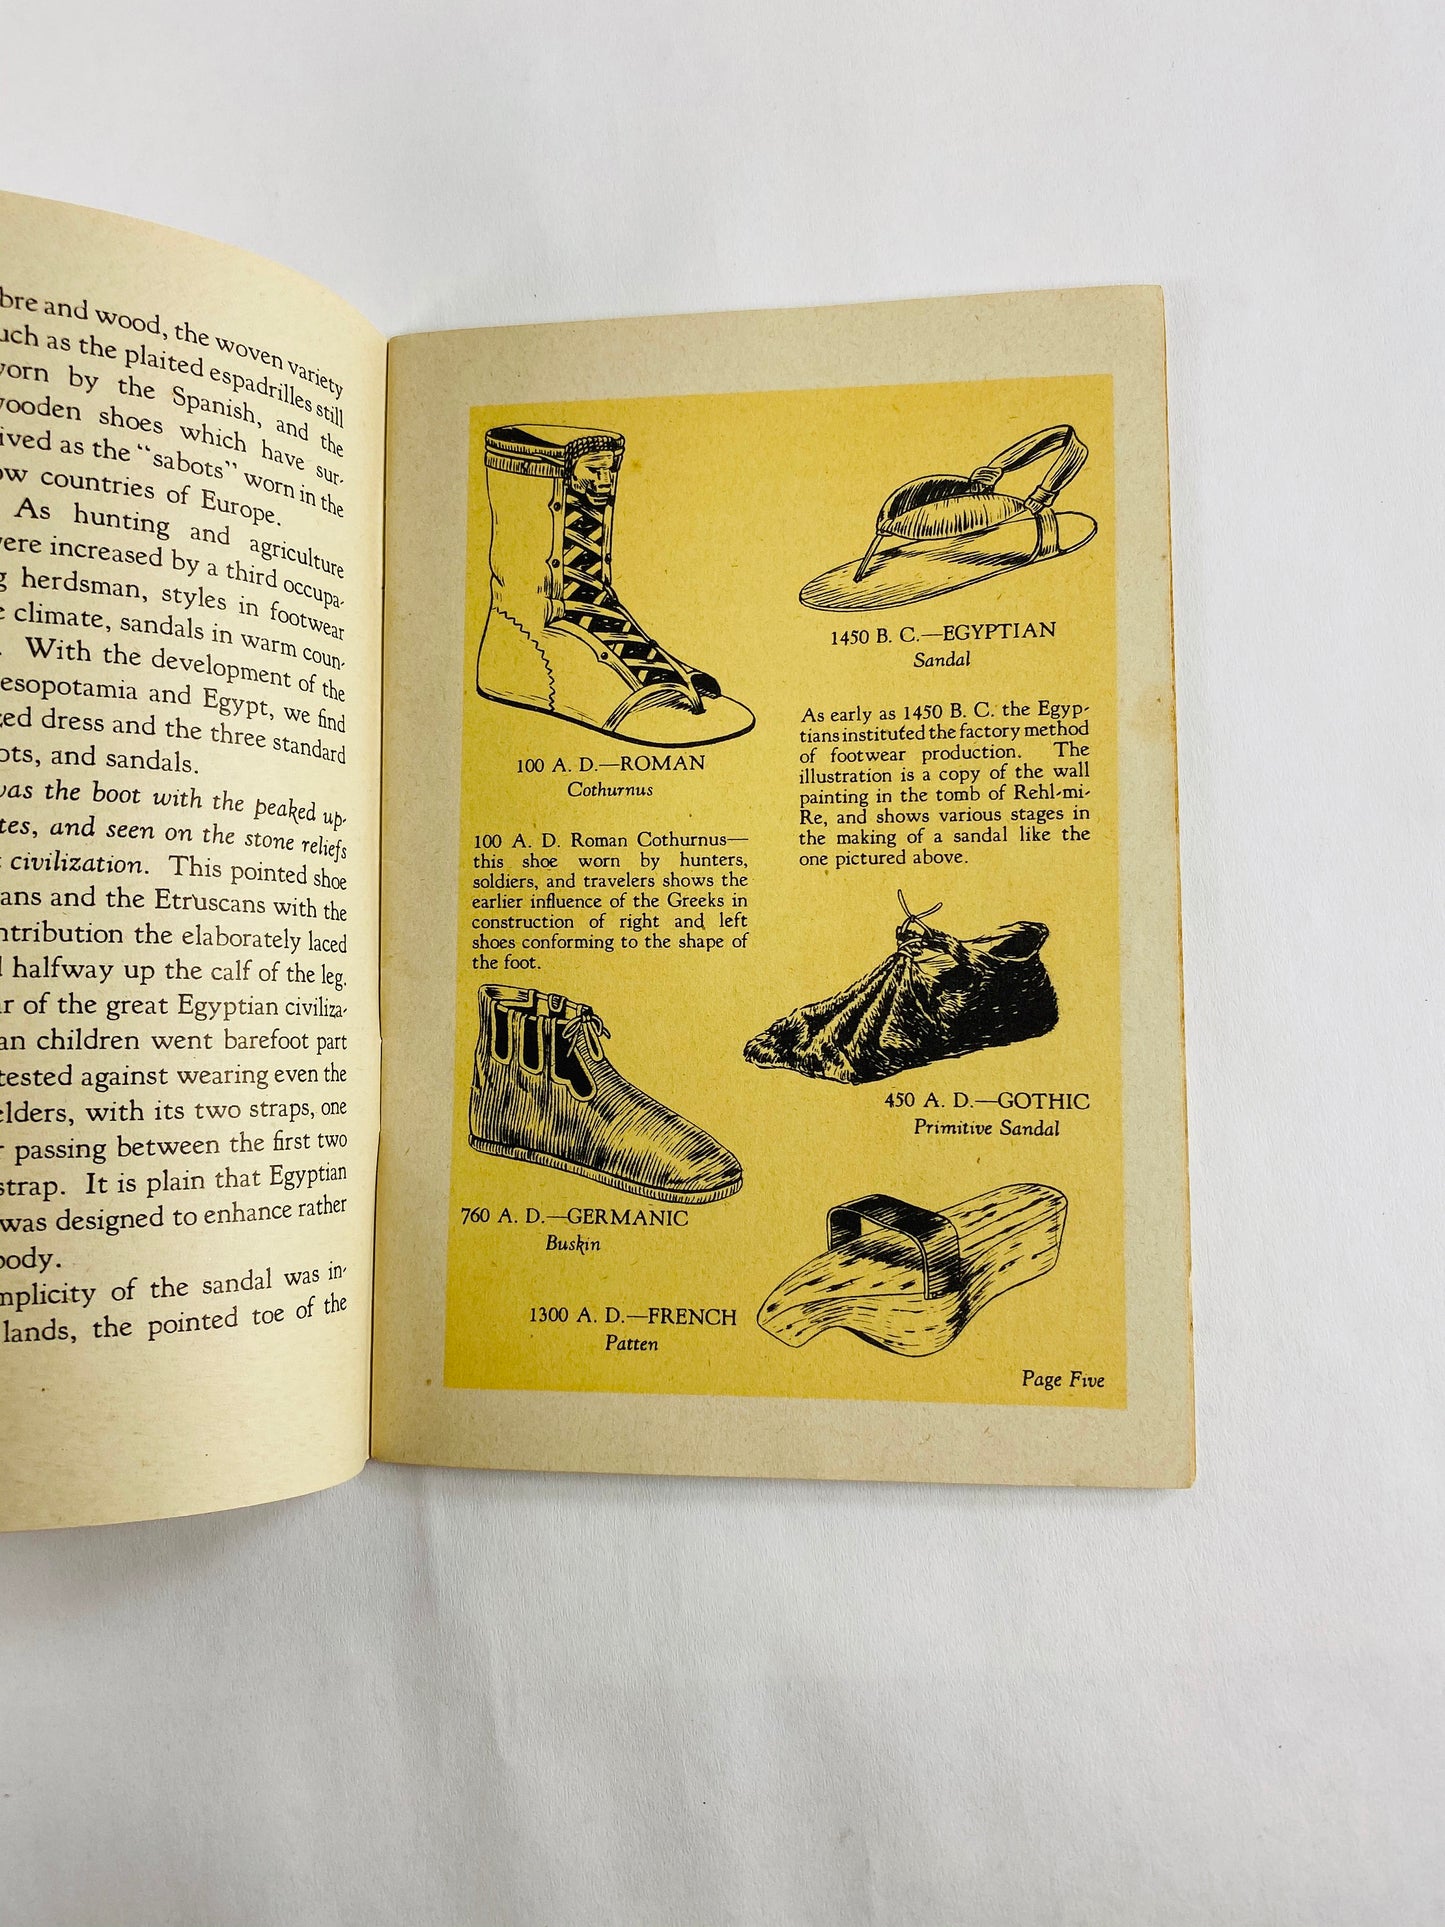 Shoes Thru the Ages Poll-Parrot and Farrar's Store vintage pamphlet circa 1950s-1960s. Fashion & history in the evolution of footwear